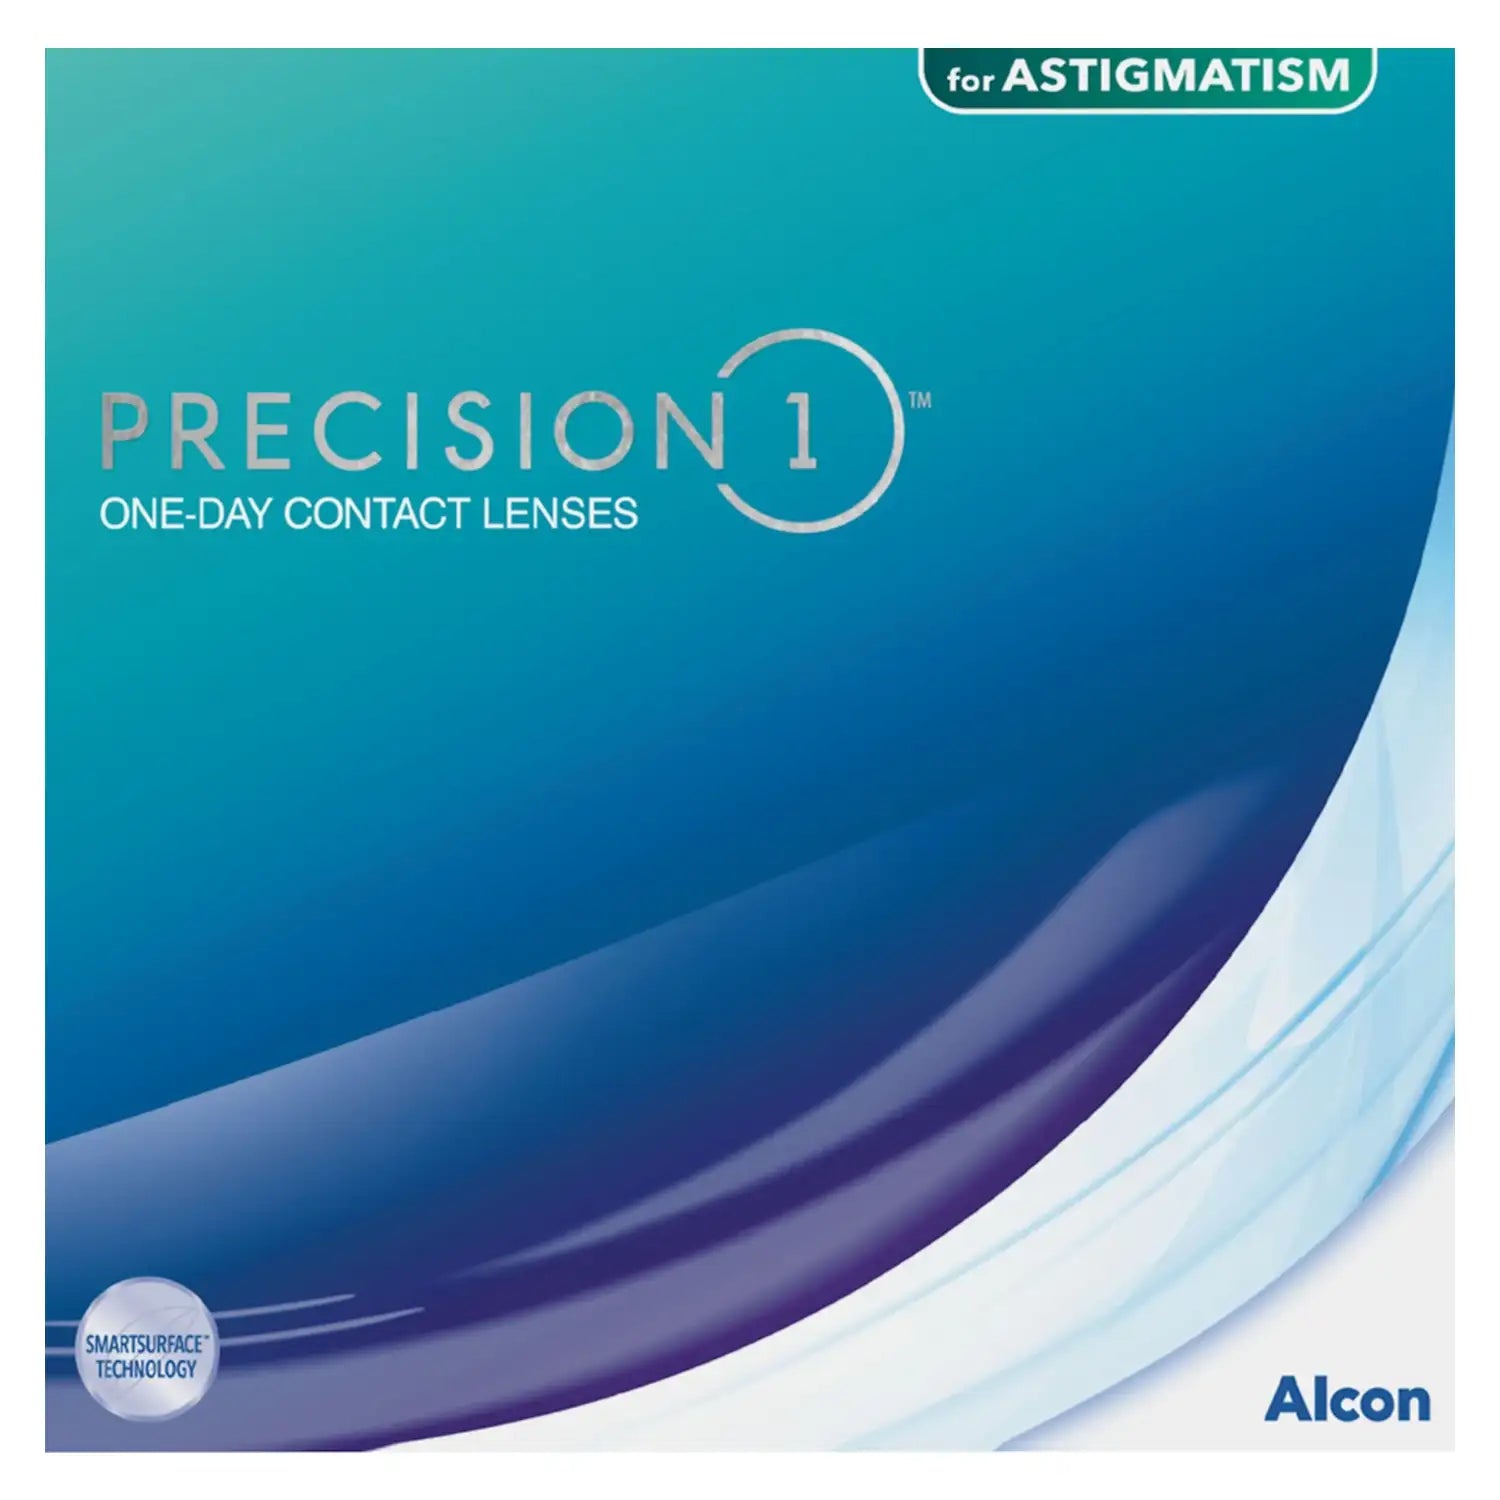 Precision 1 for Astigmatism certified contact lenses online at low price